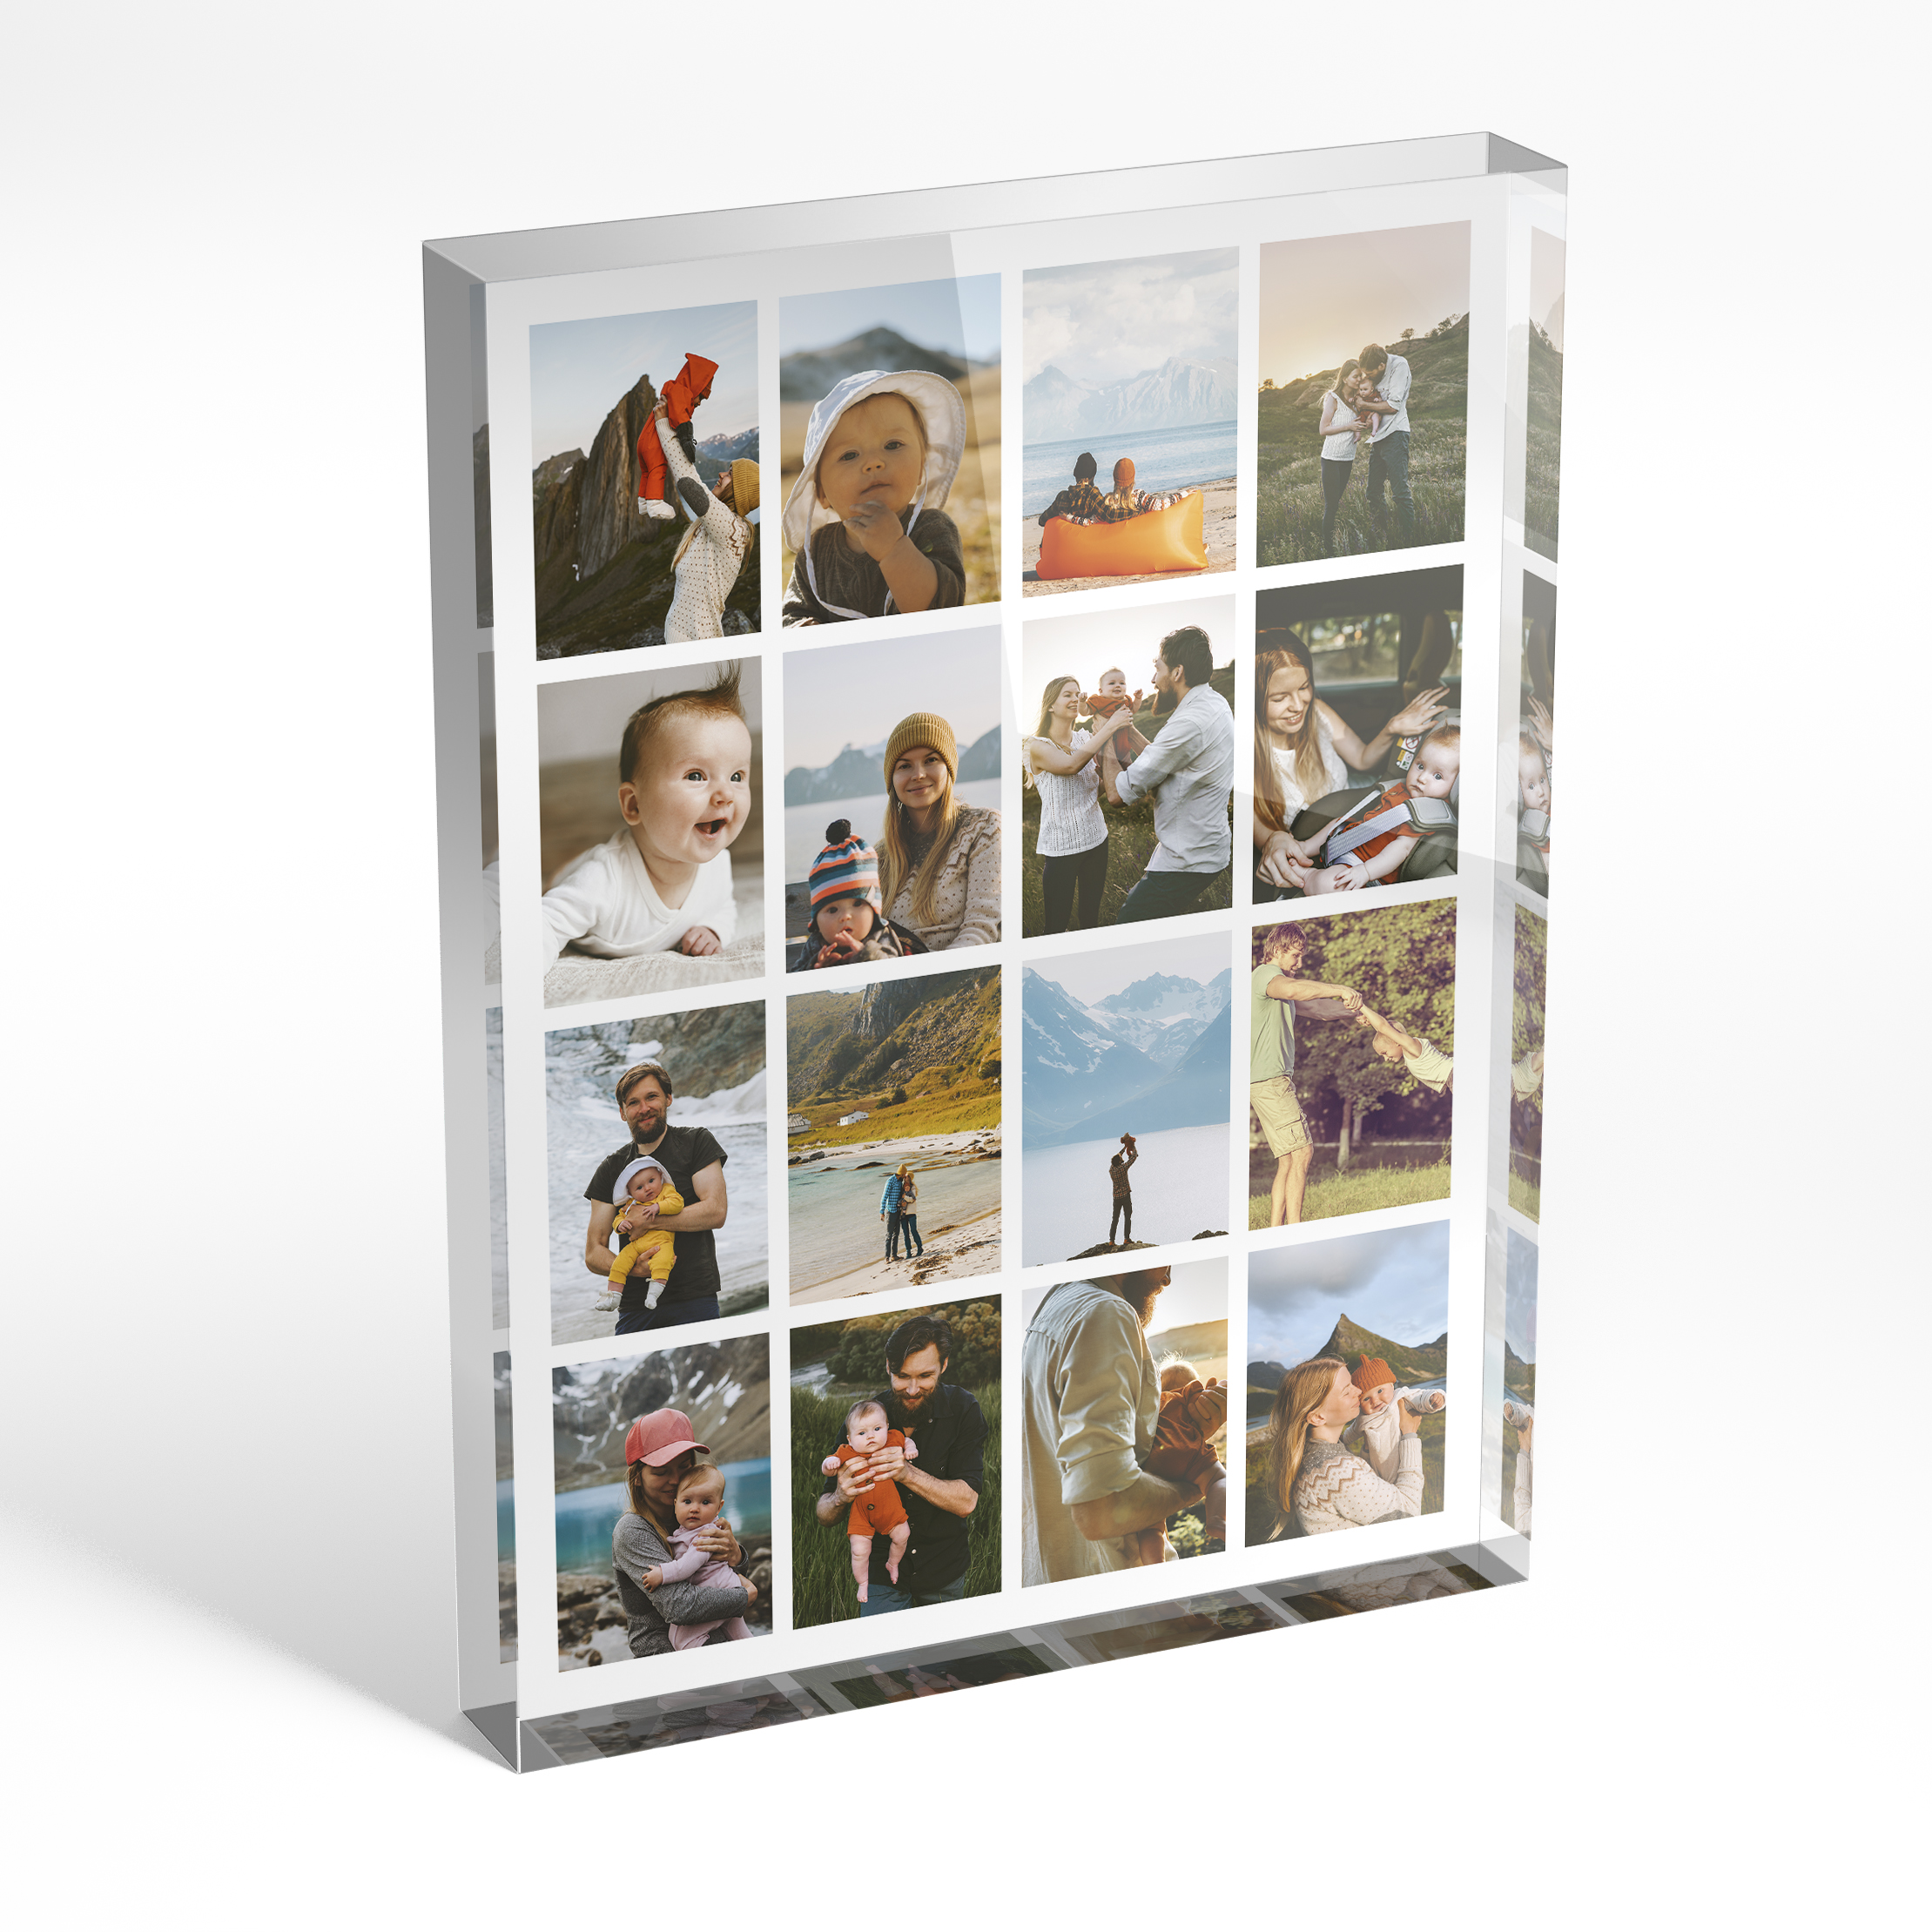 An angled side view of a portrait layout Acrylic Photo Block with space for 10+ photos. Thiis design is named "Spectrum of Moments". 